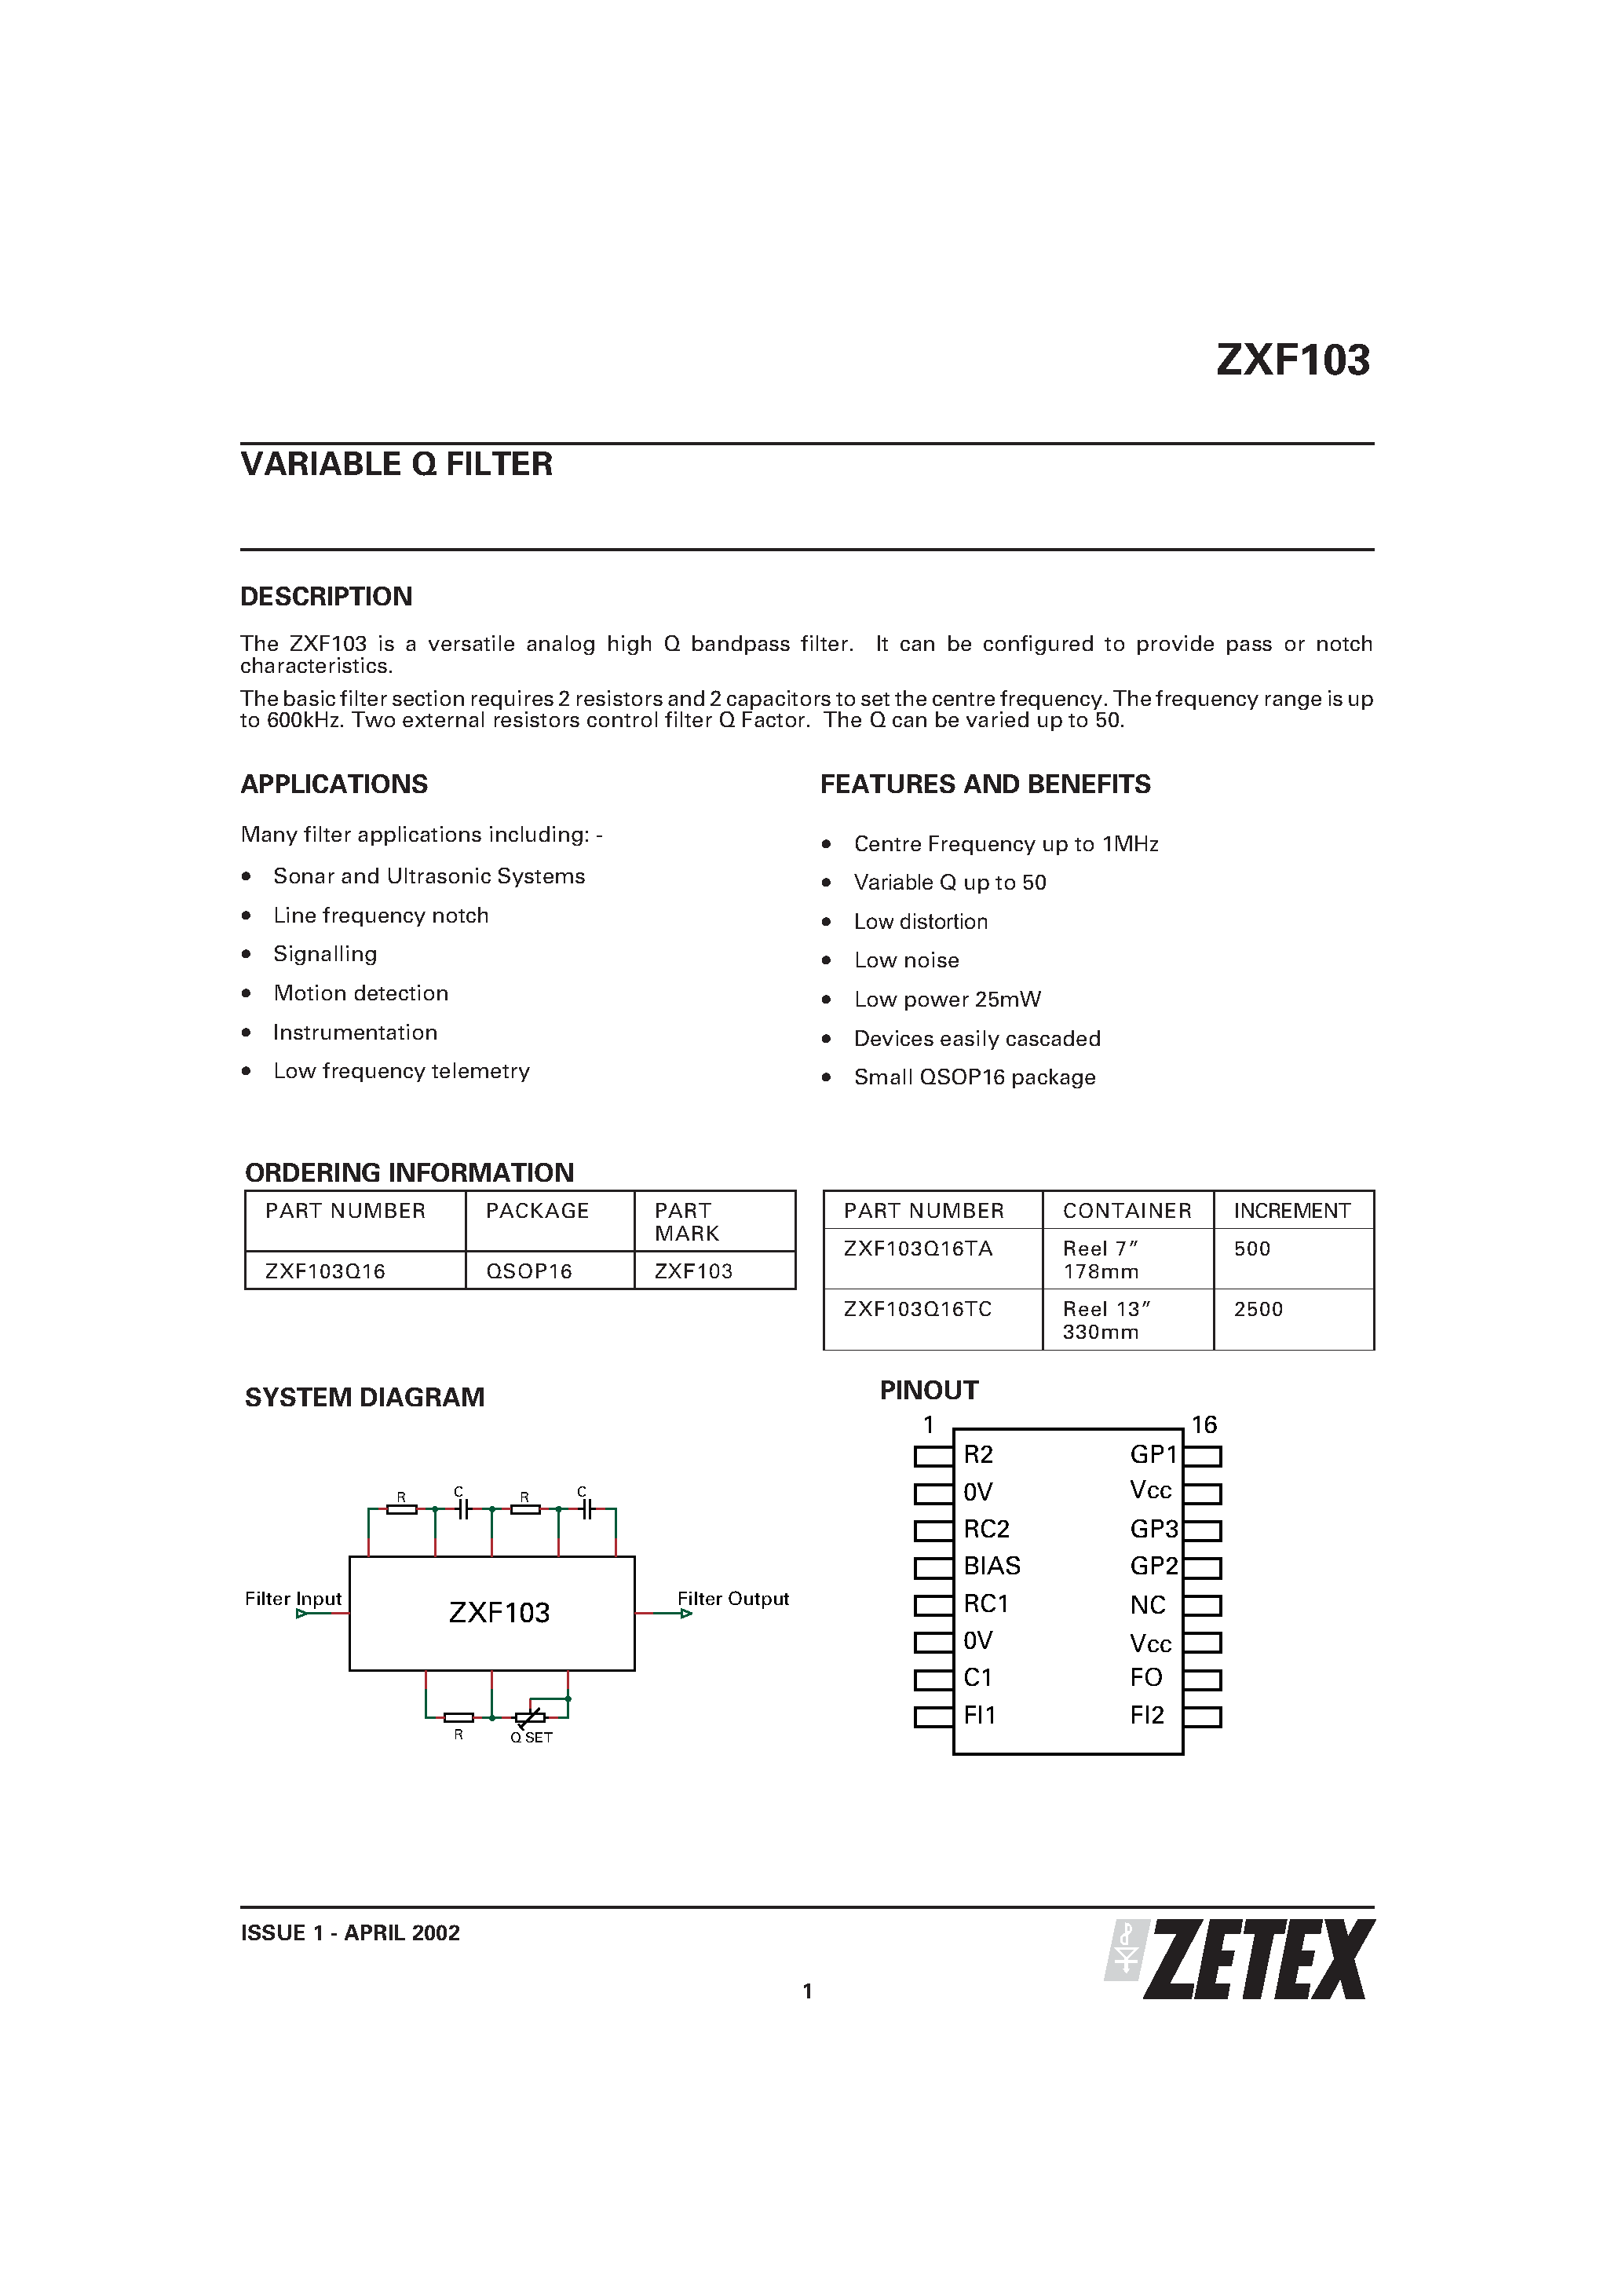 Datasheet ZXF103Q16 - VARIABLE Q FILTER page 1